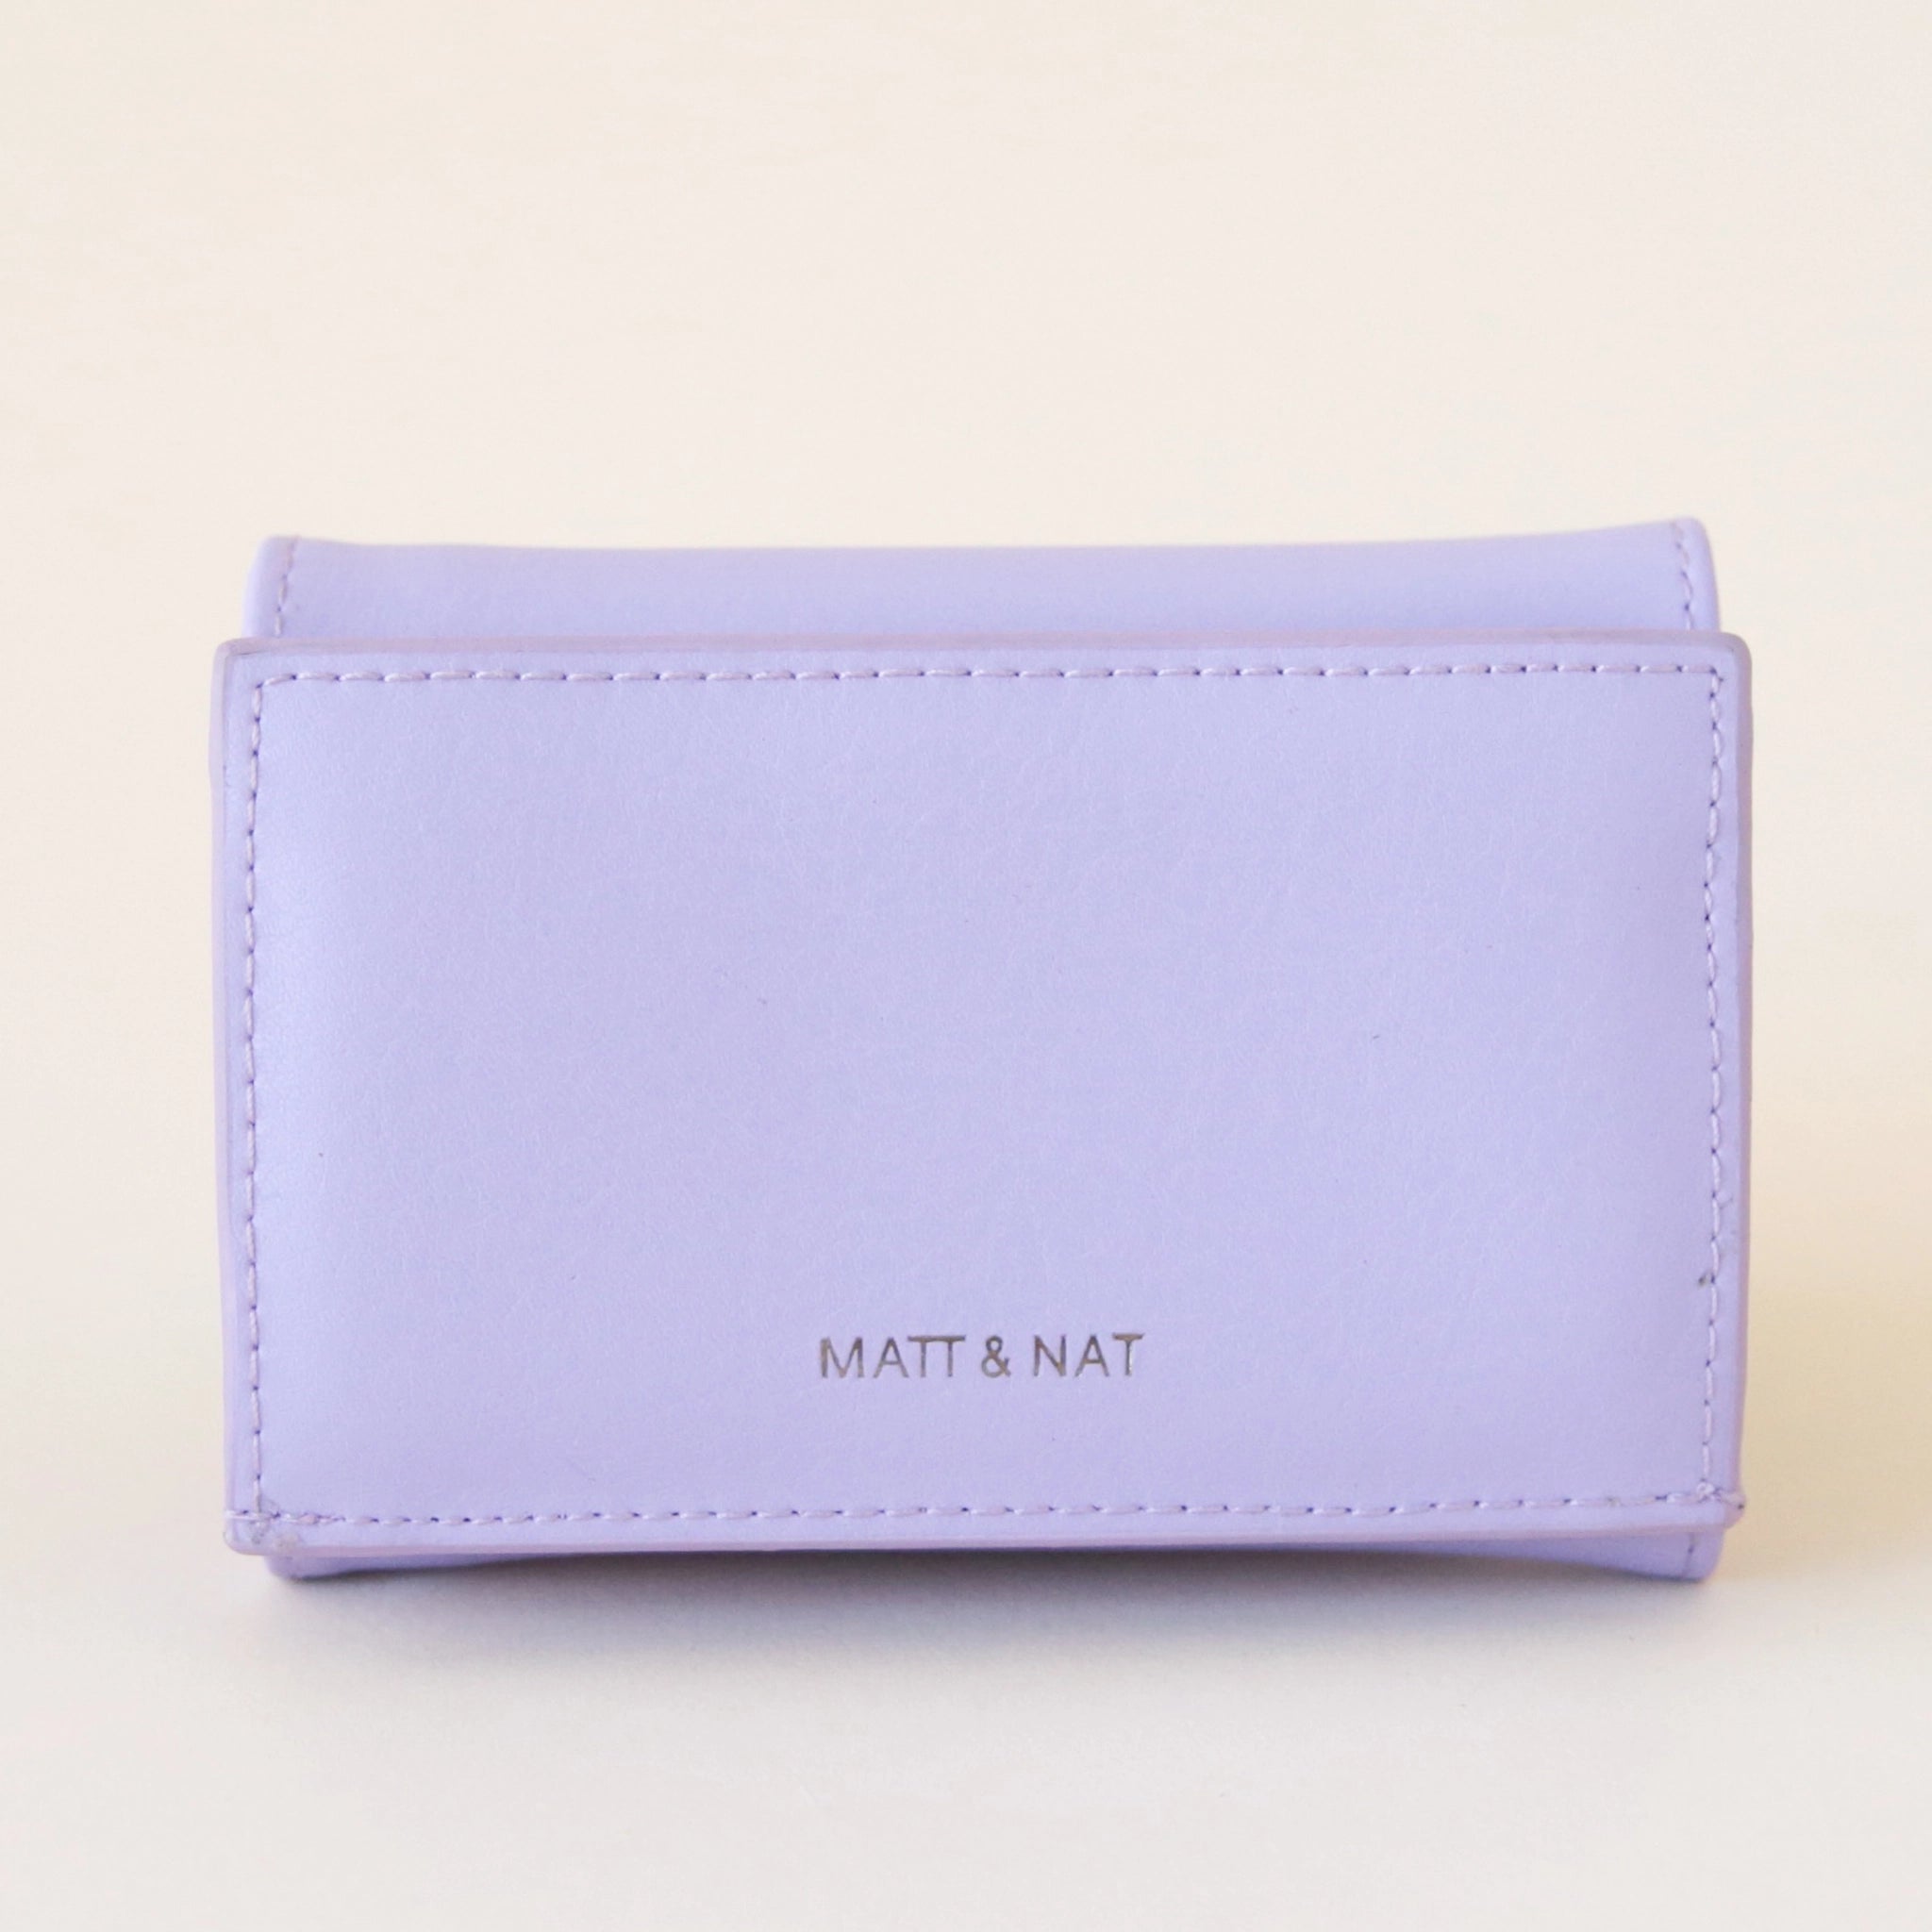 On a cream background is a lavender colored squares wallet with a folding detail and tiny text on the bottom of the front that reads, "Matt & Nat". 